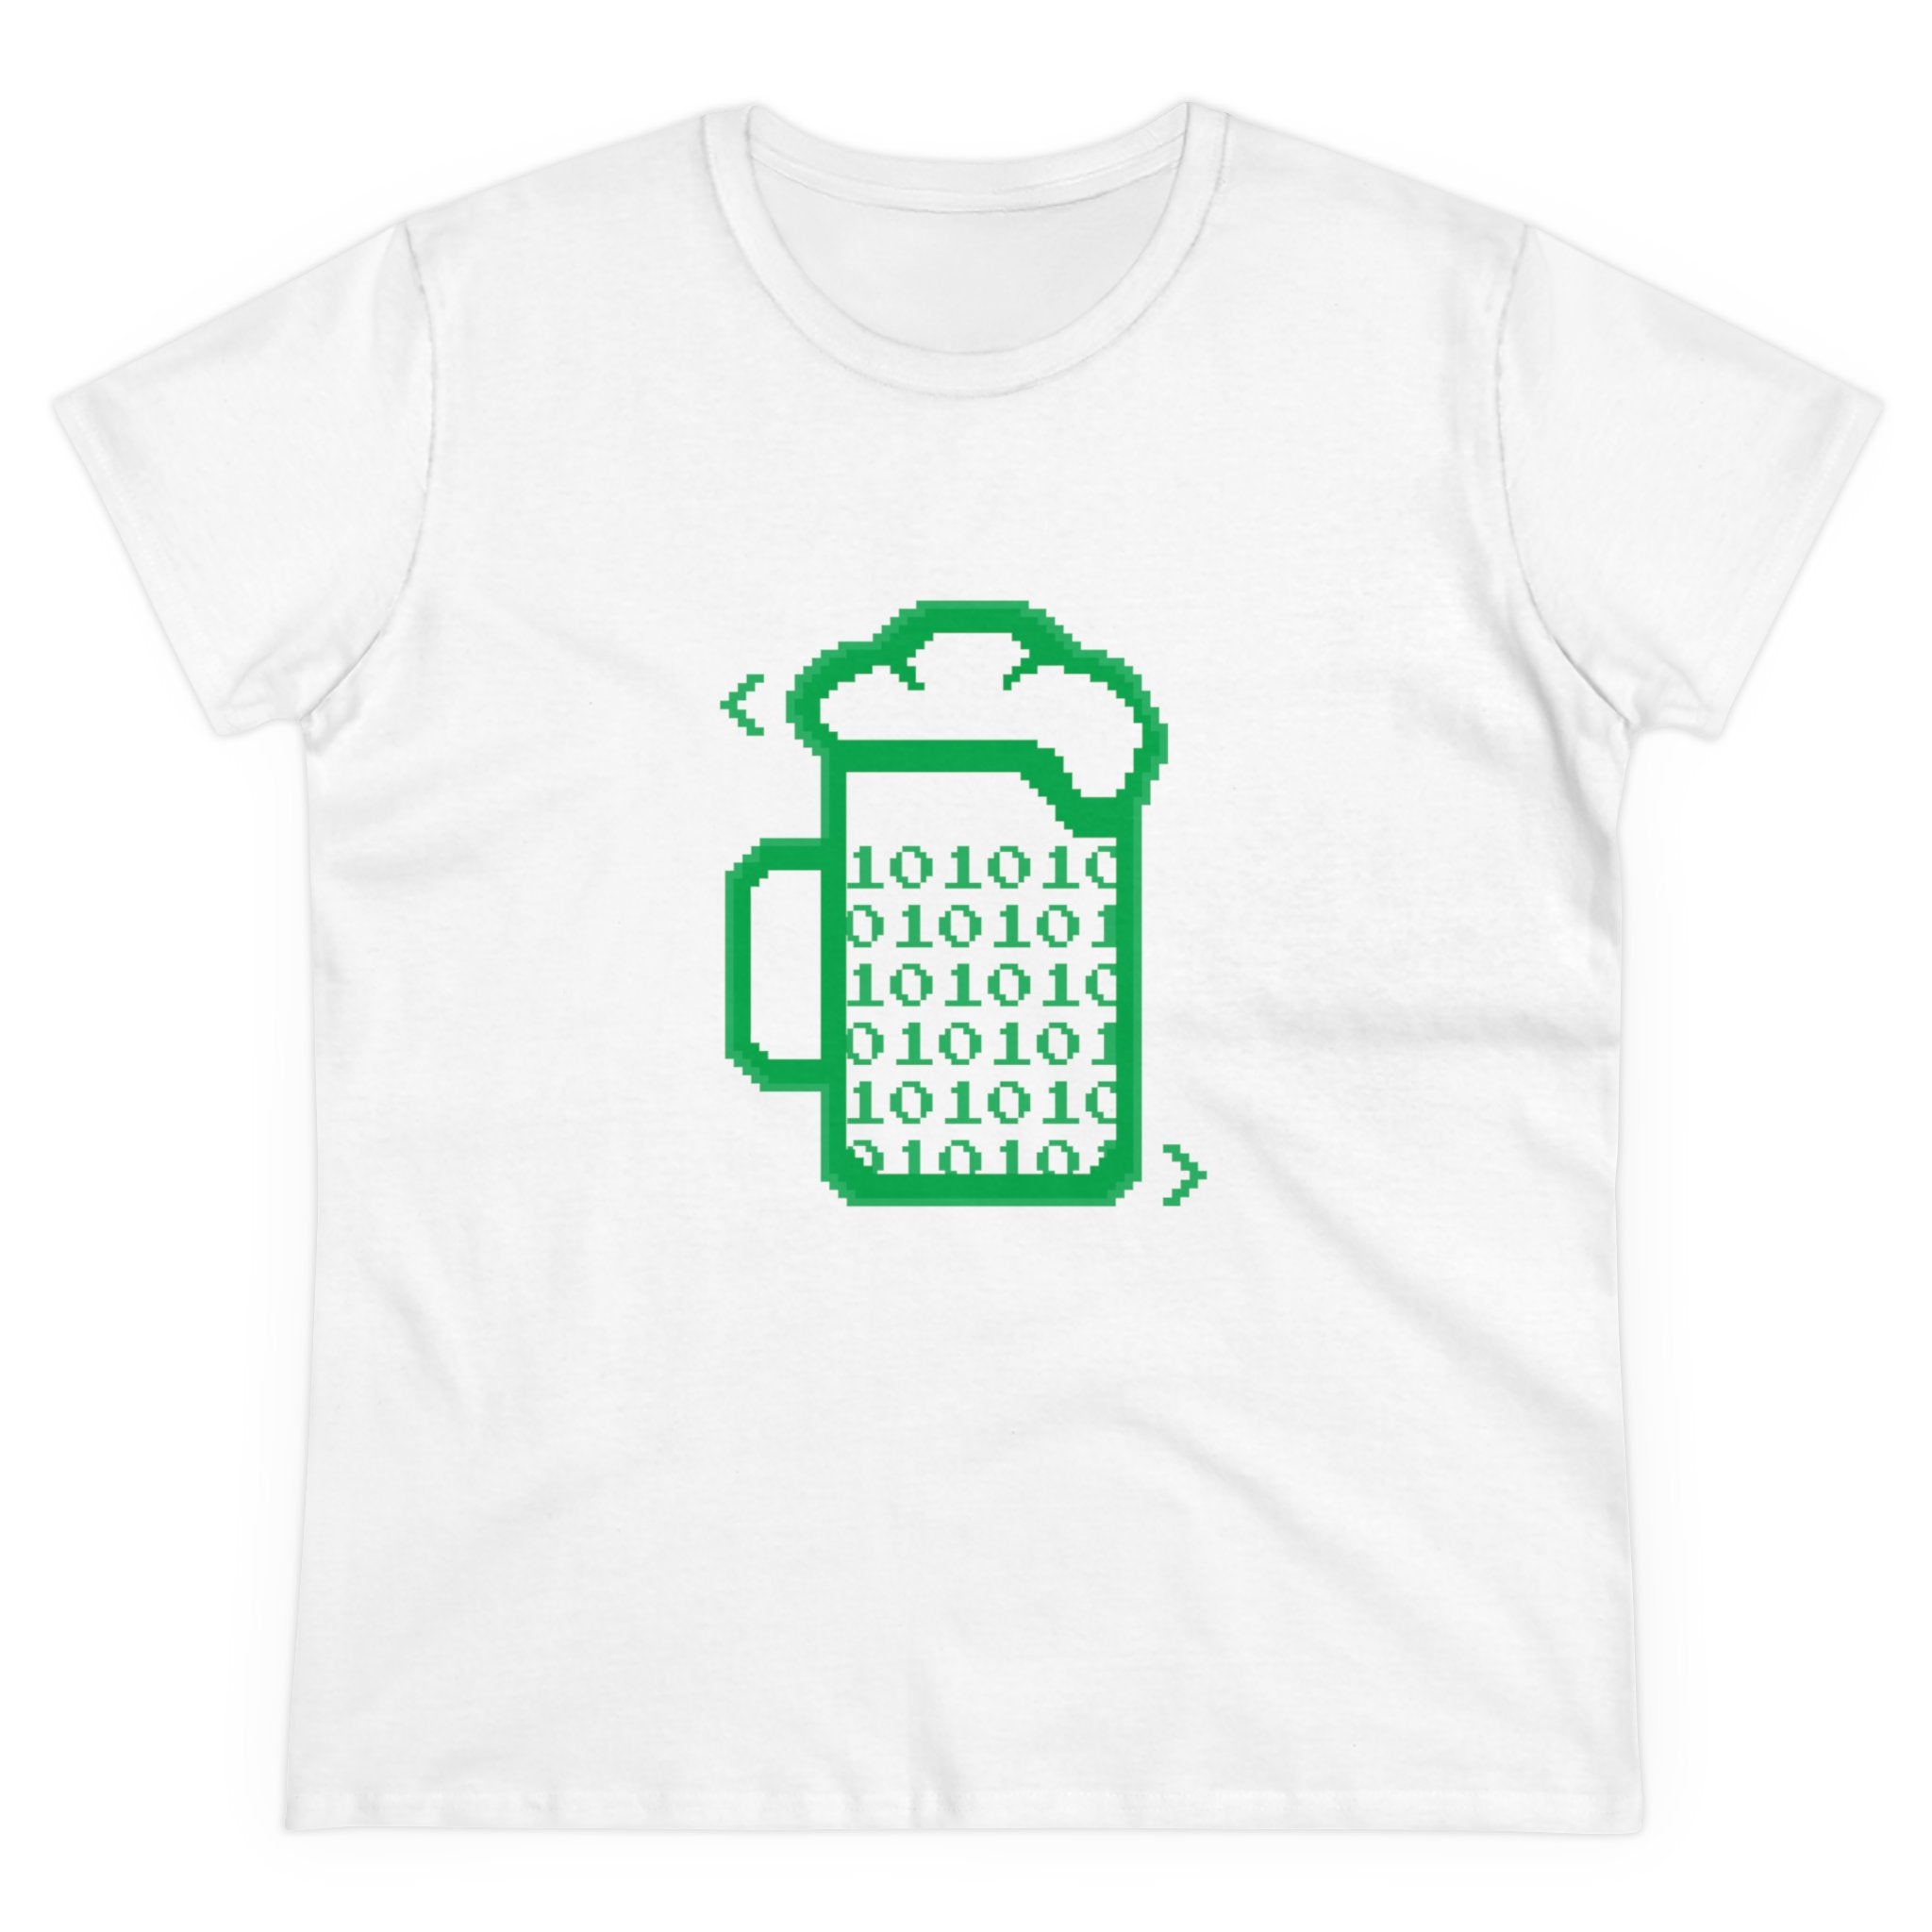 A Beer Code - Women's Tee featuring a digital art graphic by Beer Code designs, showcasing a beer mug filled with binary code (0s and 1s) in green color, crafted from pre-shrunk cotton.